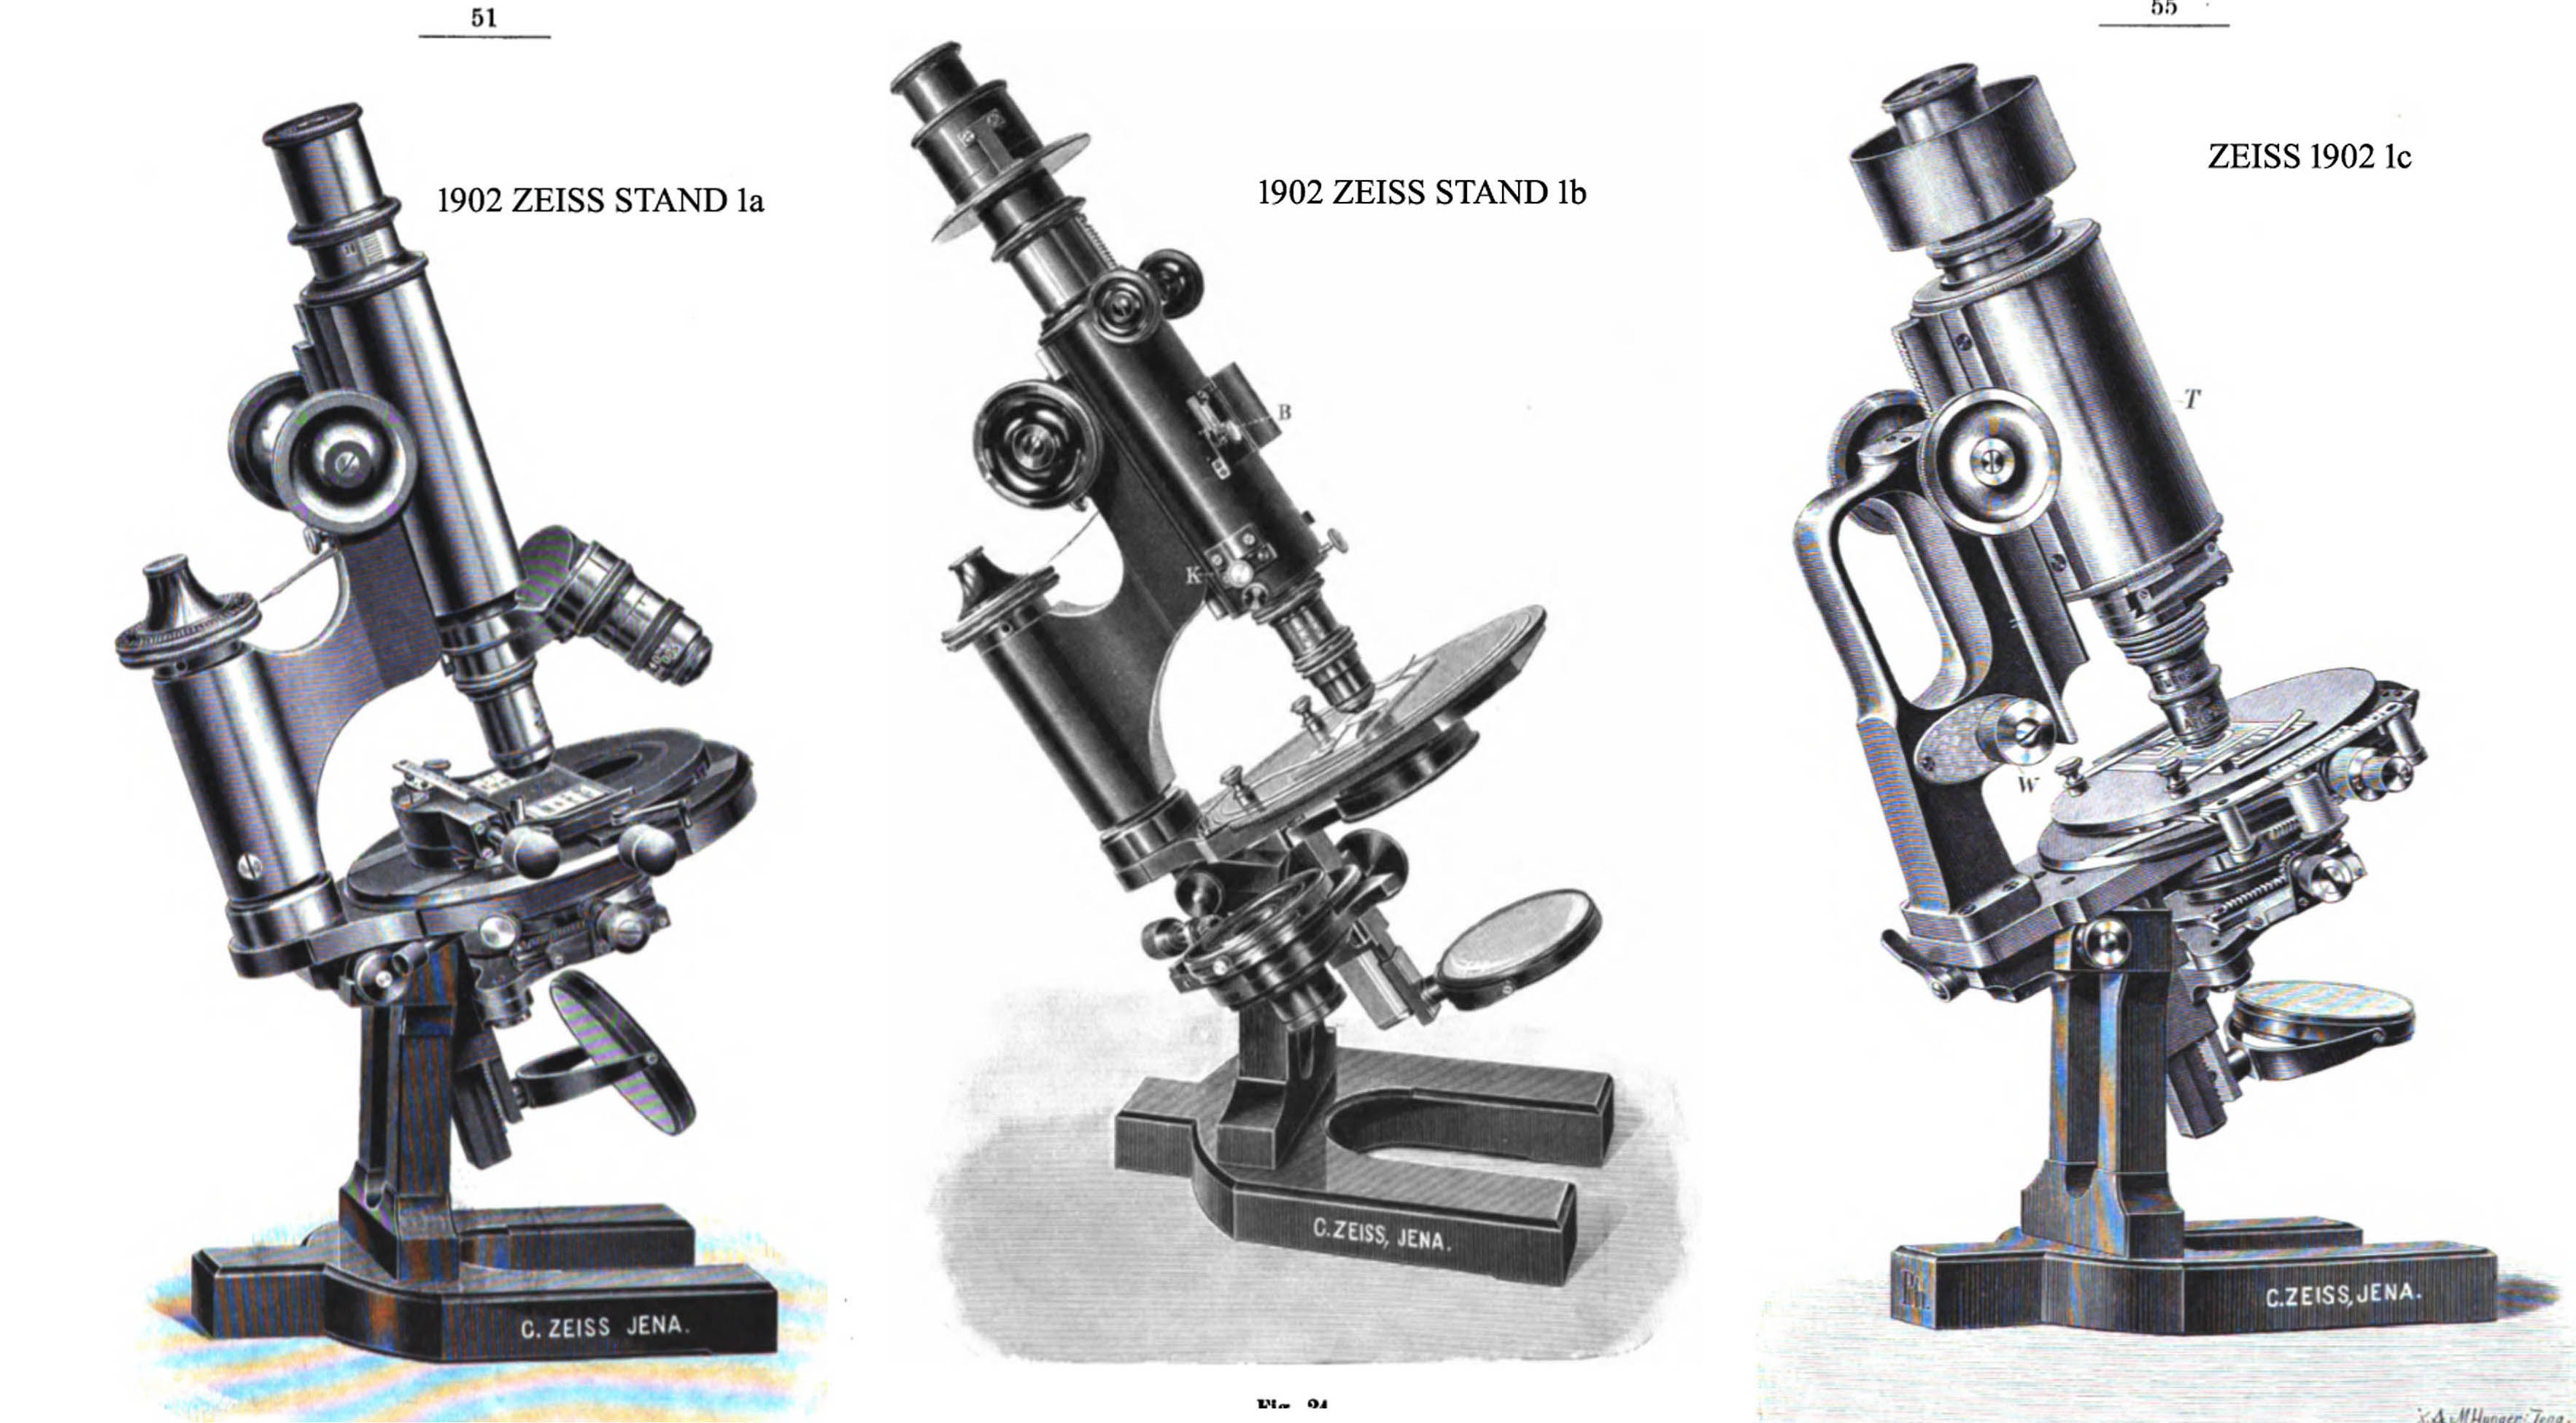 Zeiss stands 1a,1b,1c from 1902